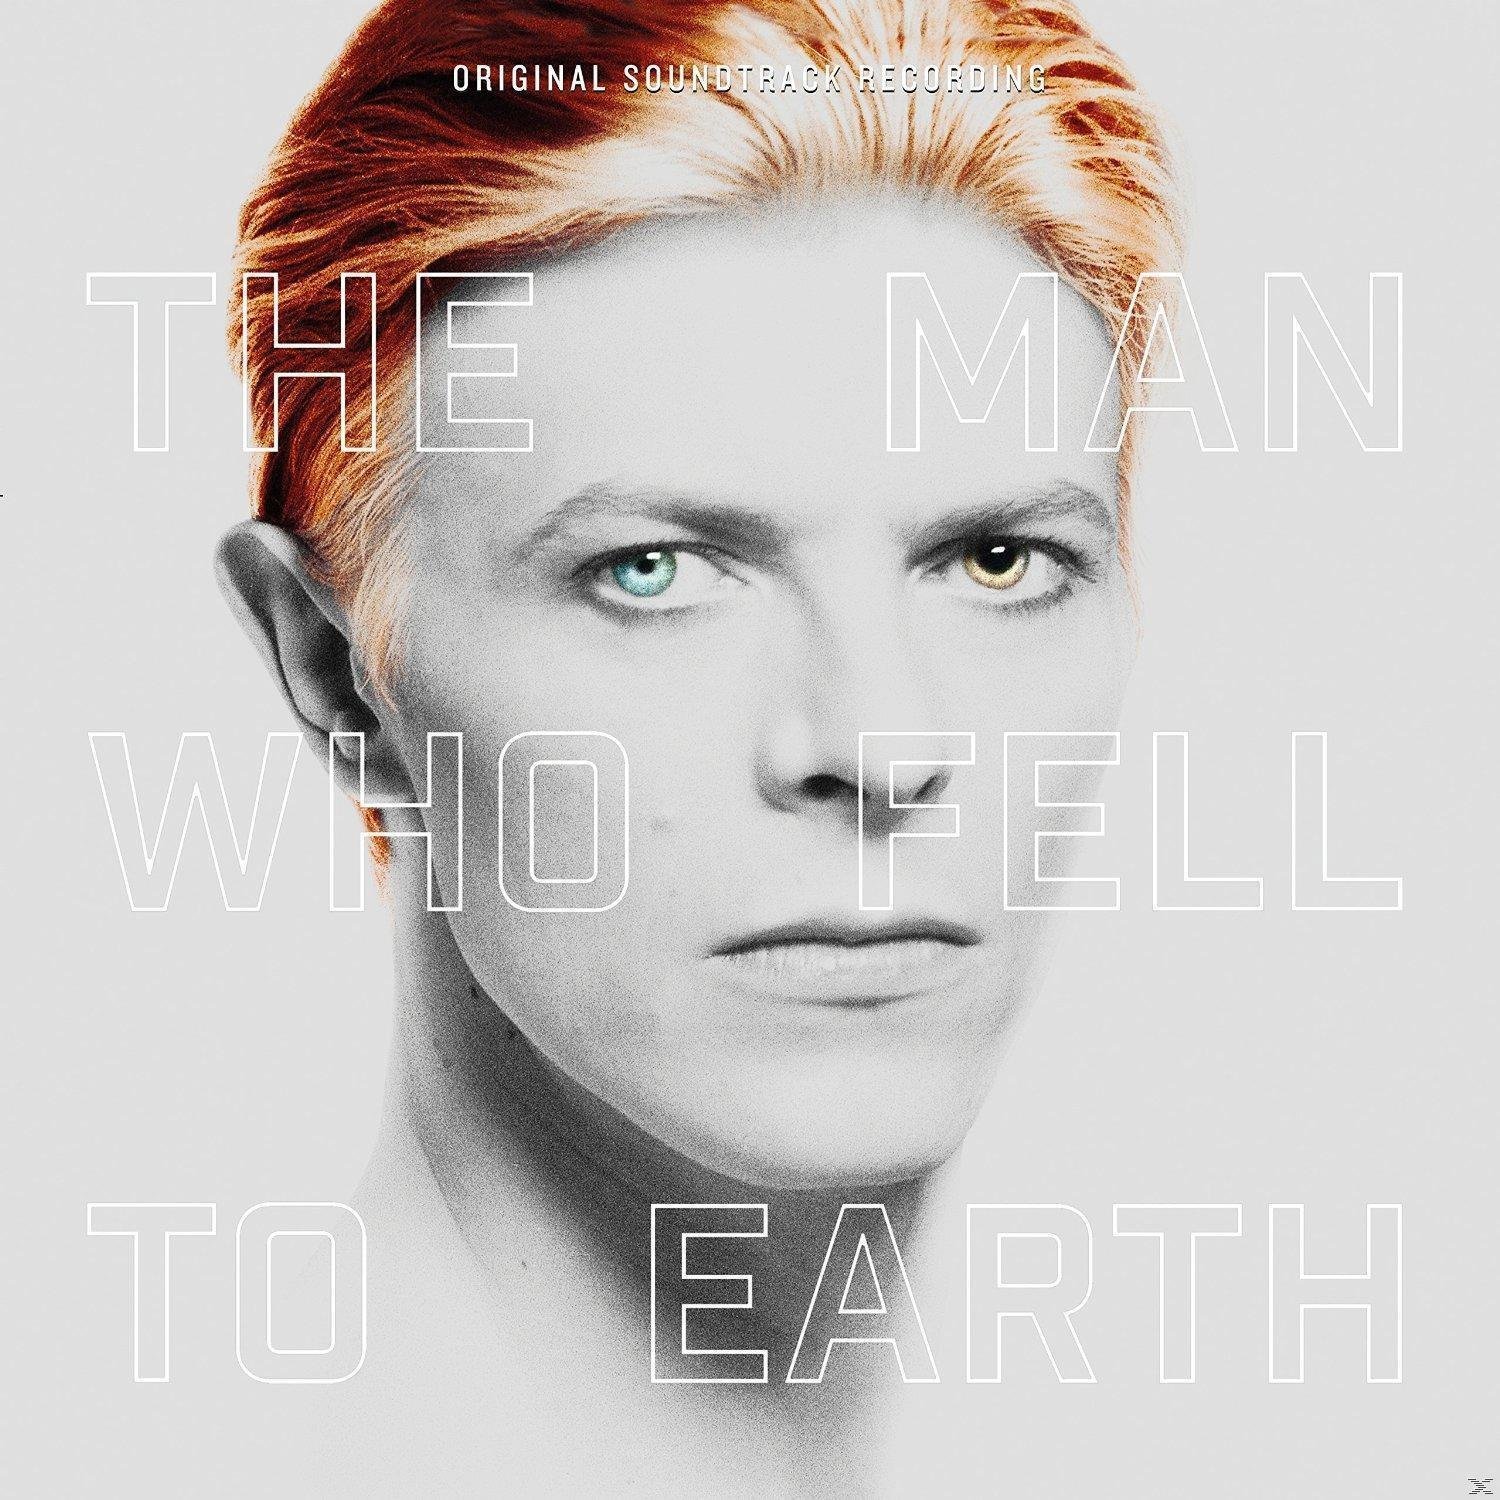 Disco de vinilo David Bowie - The Man Who Fell To Earth OST (Starring David Bowie) (2 LP + 2 CD)